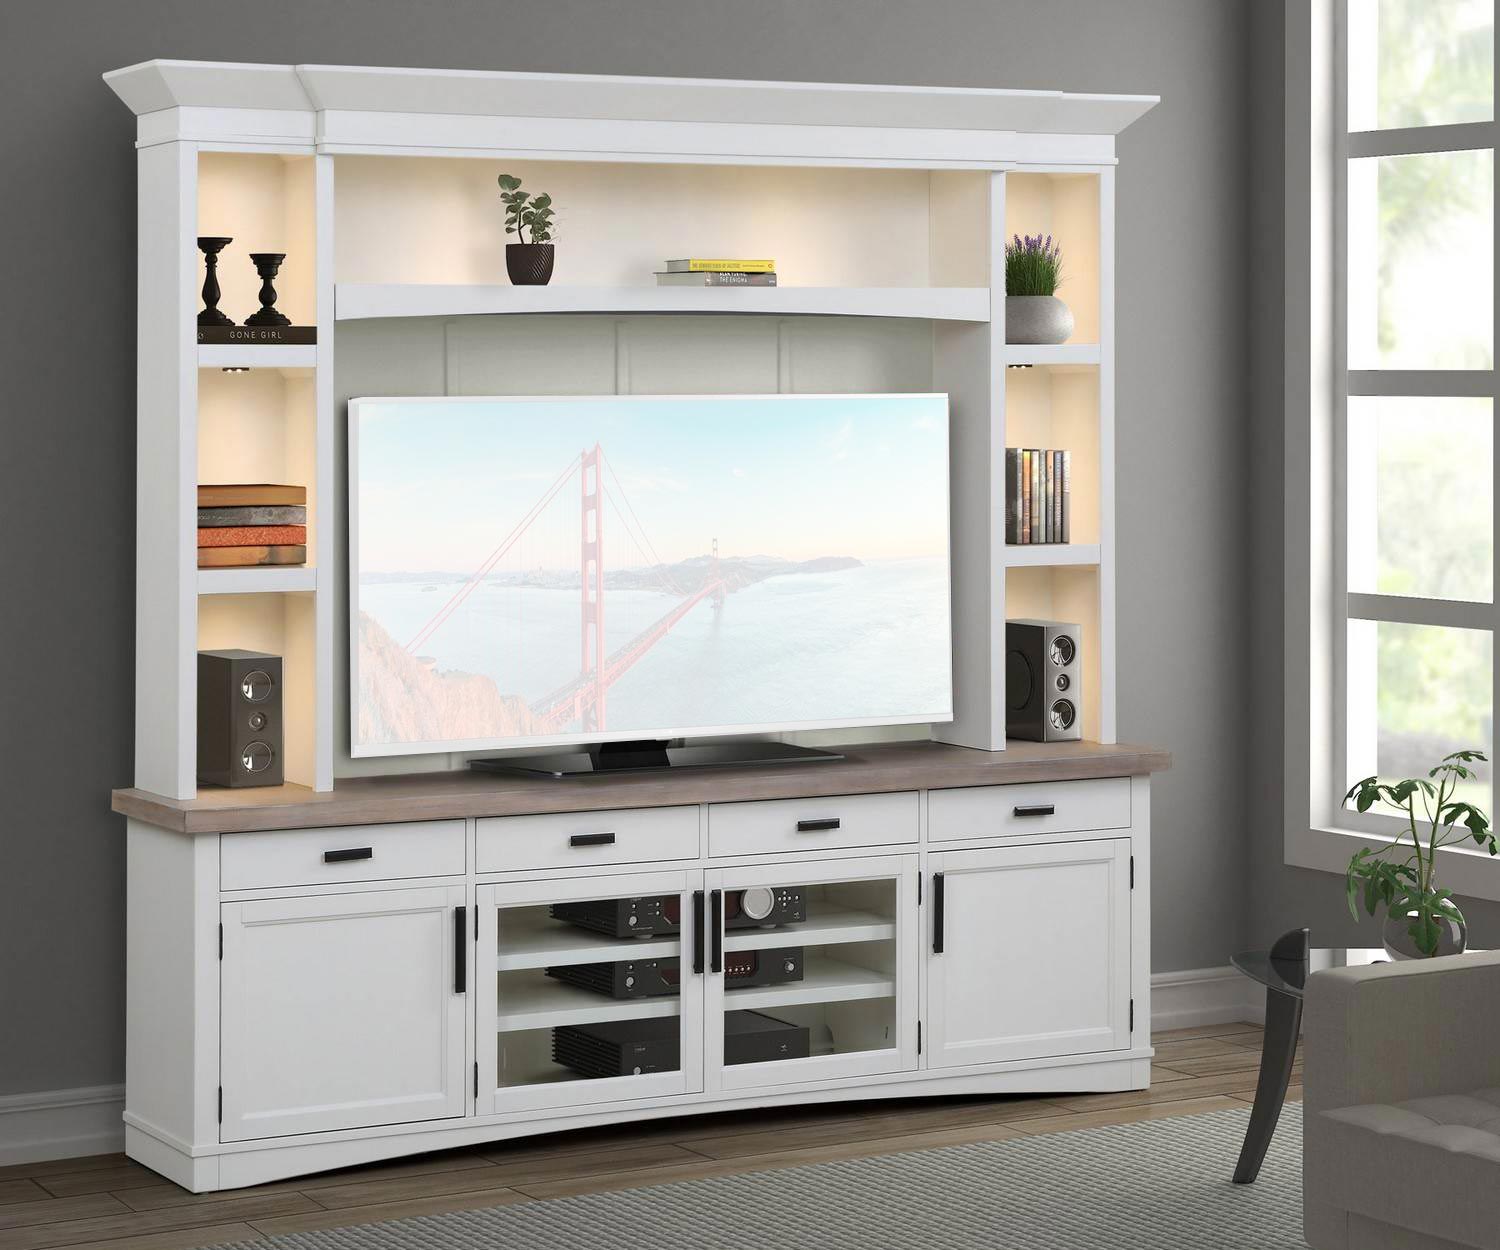 Parker House Americana Modern 92 Inch TV Console with Hutch, Backpanel and LED Lights - Cotton